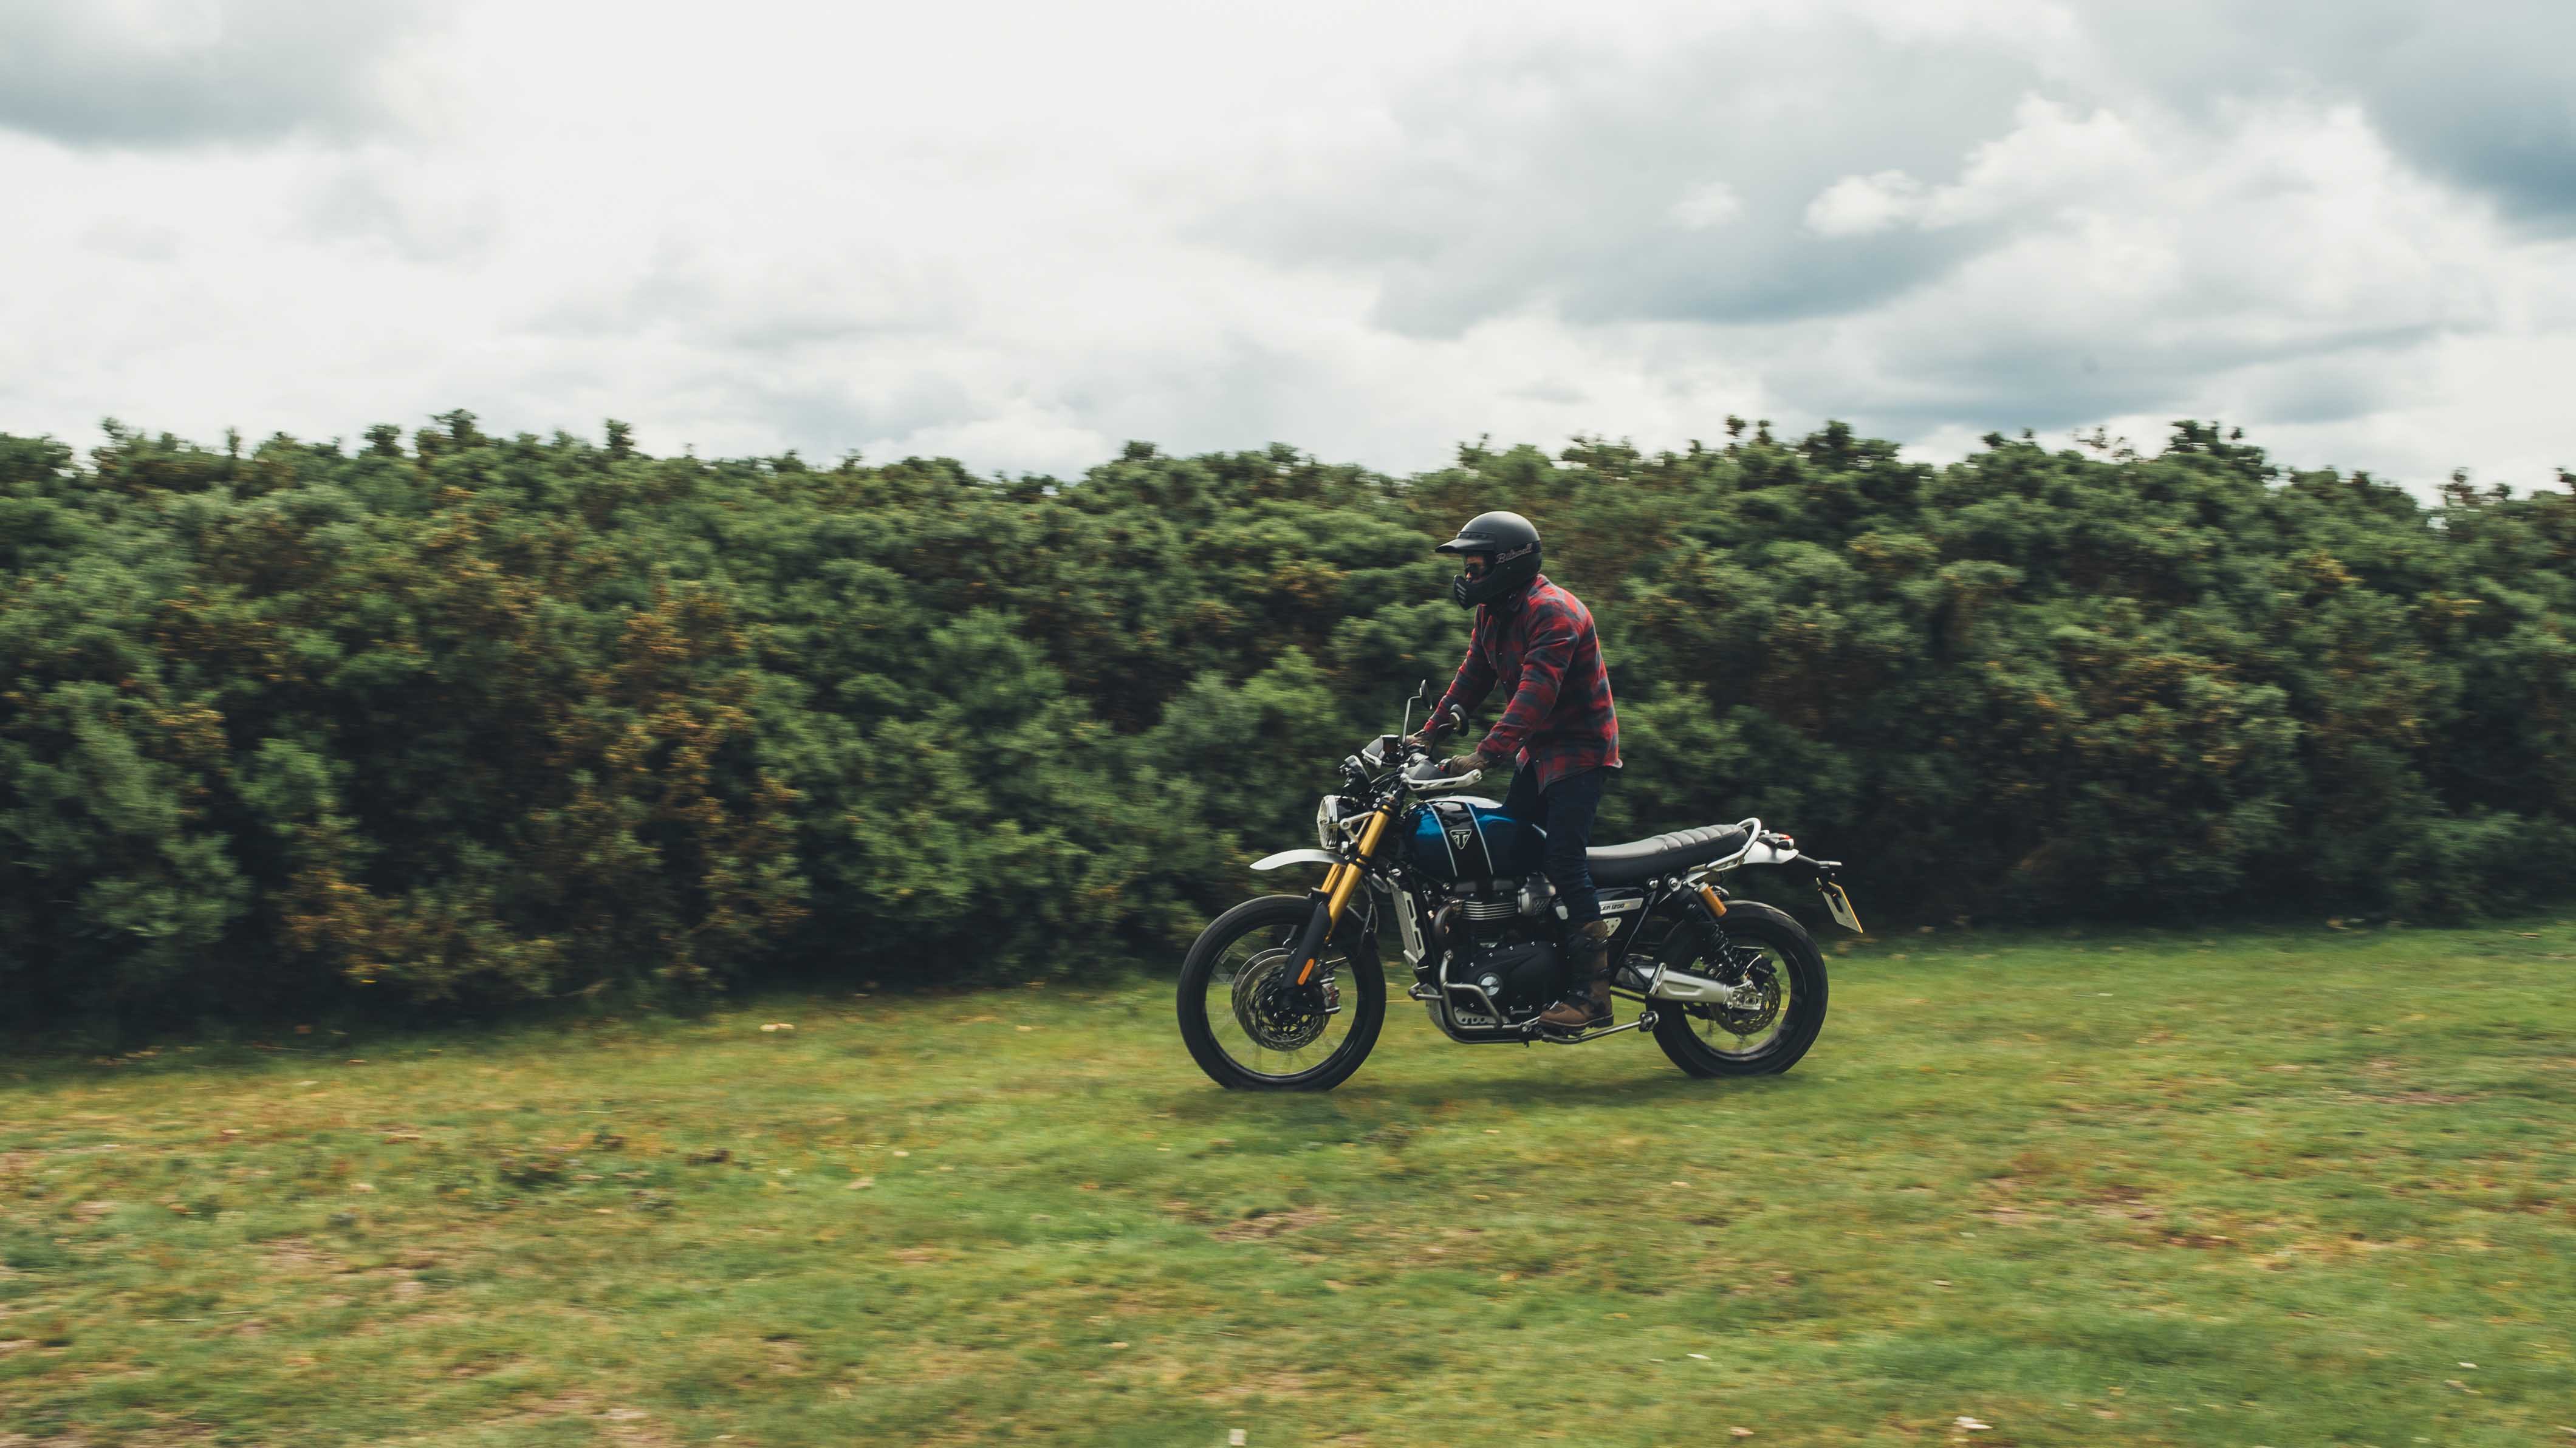 The Scrambler's upright riding position helps off road